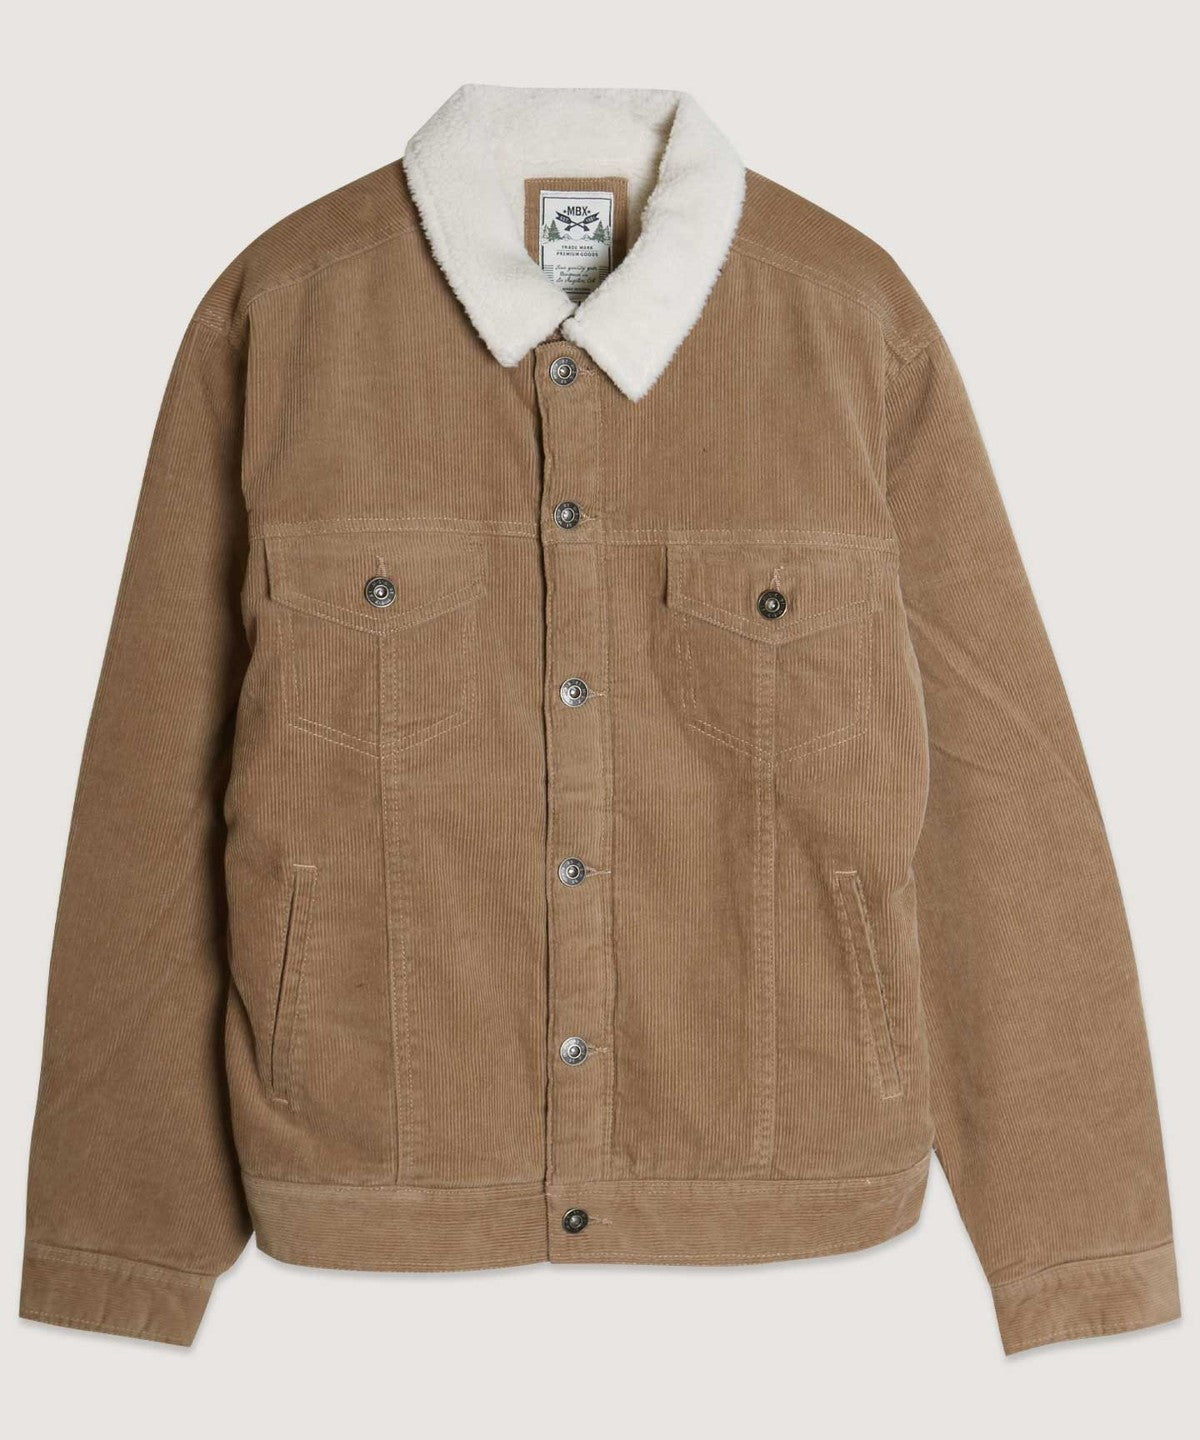 - Casual Corduroy Lined Trucker Jacket for Men - 2 colors - mens jacket at TFC&H Co.